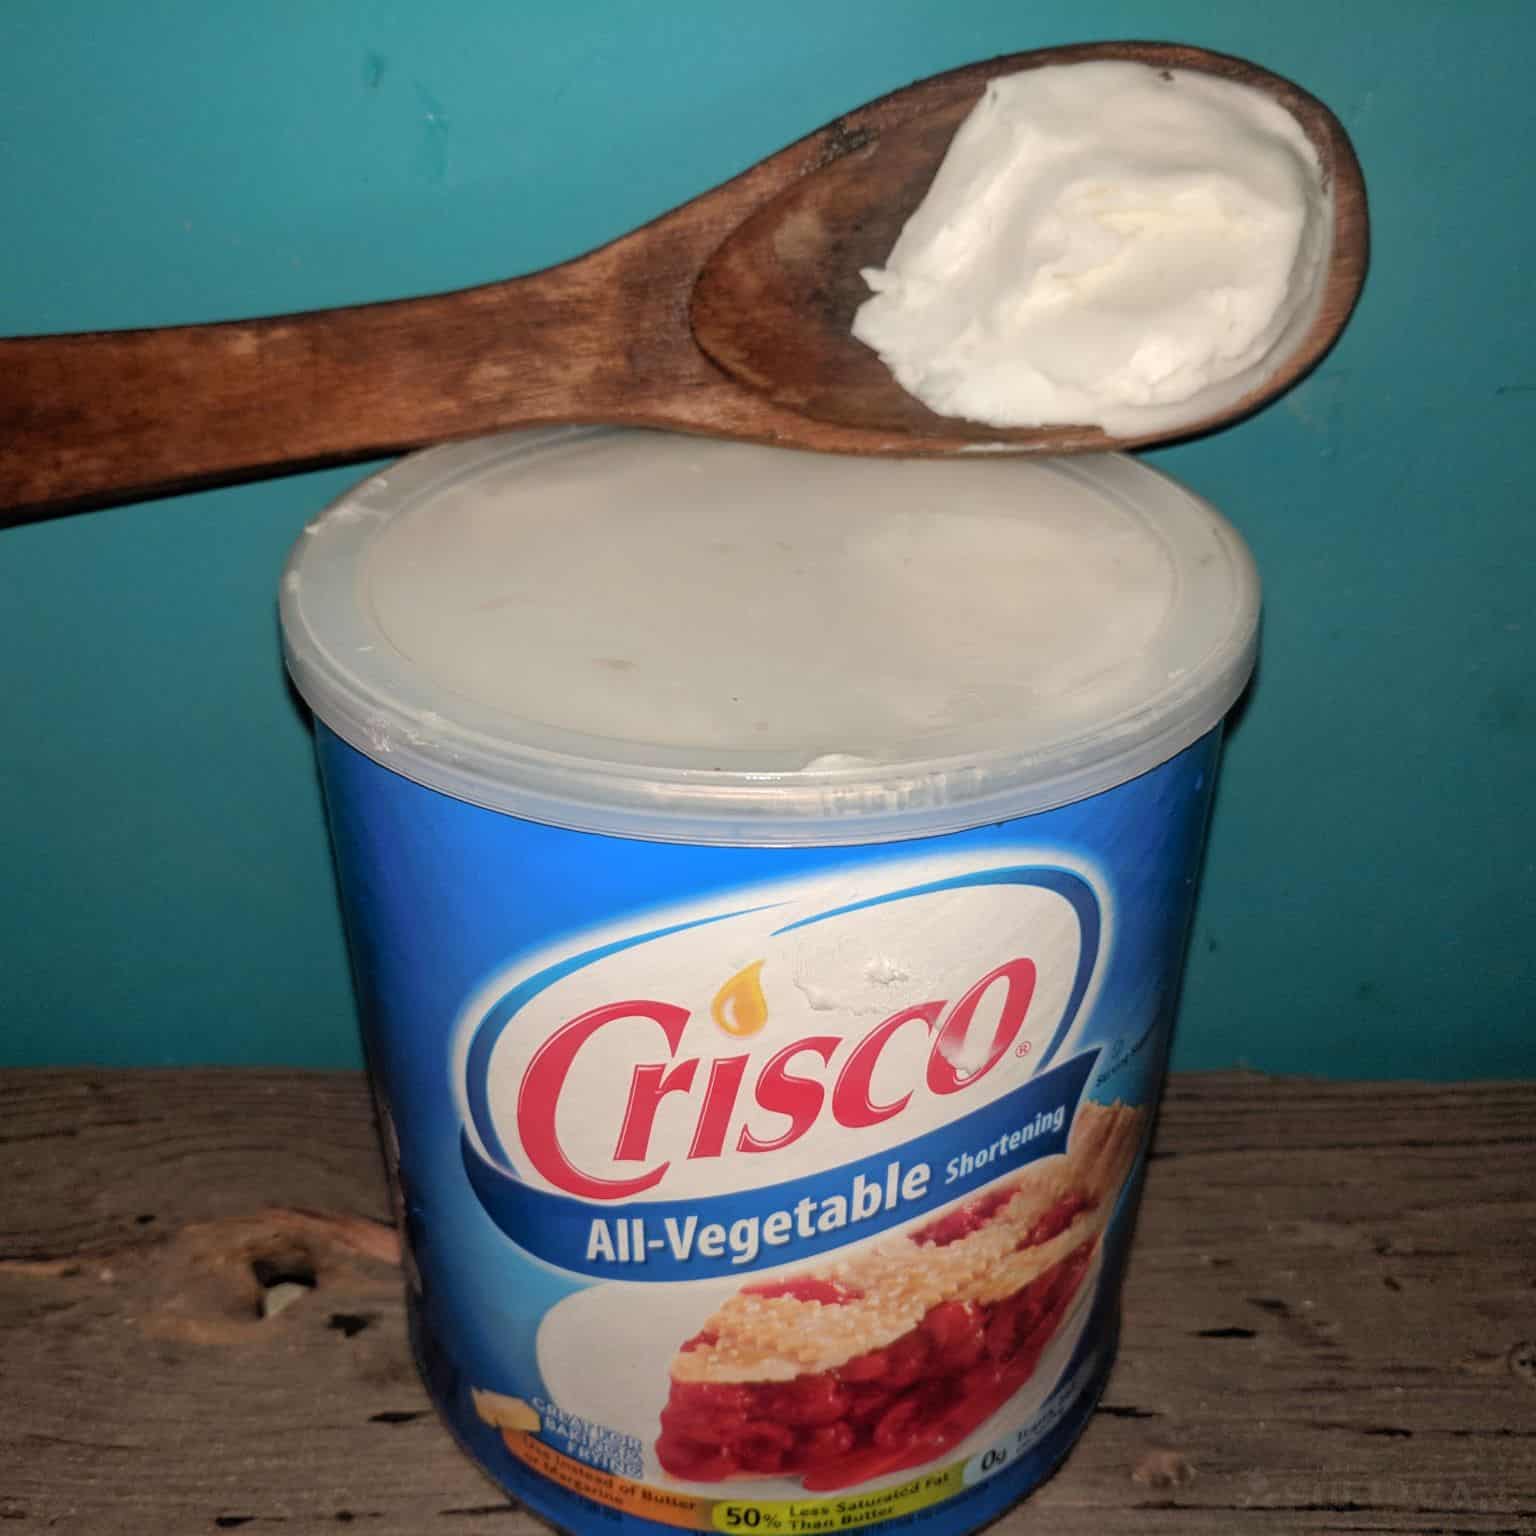 20 Uses for Crisco in and Around Your Home - Survival Sullivan